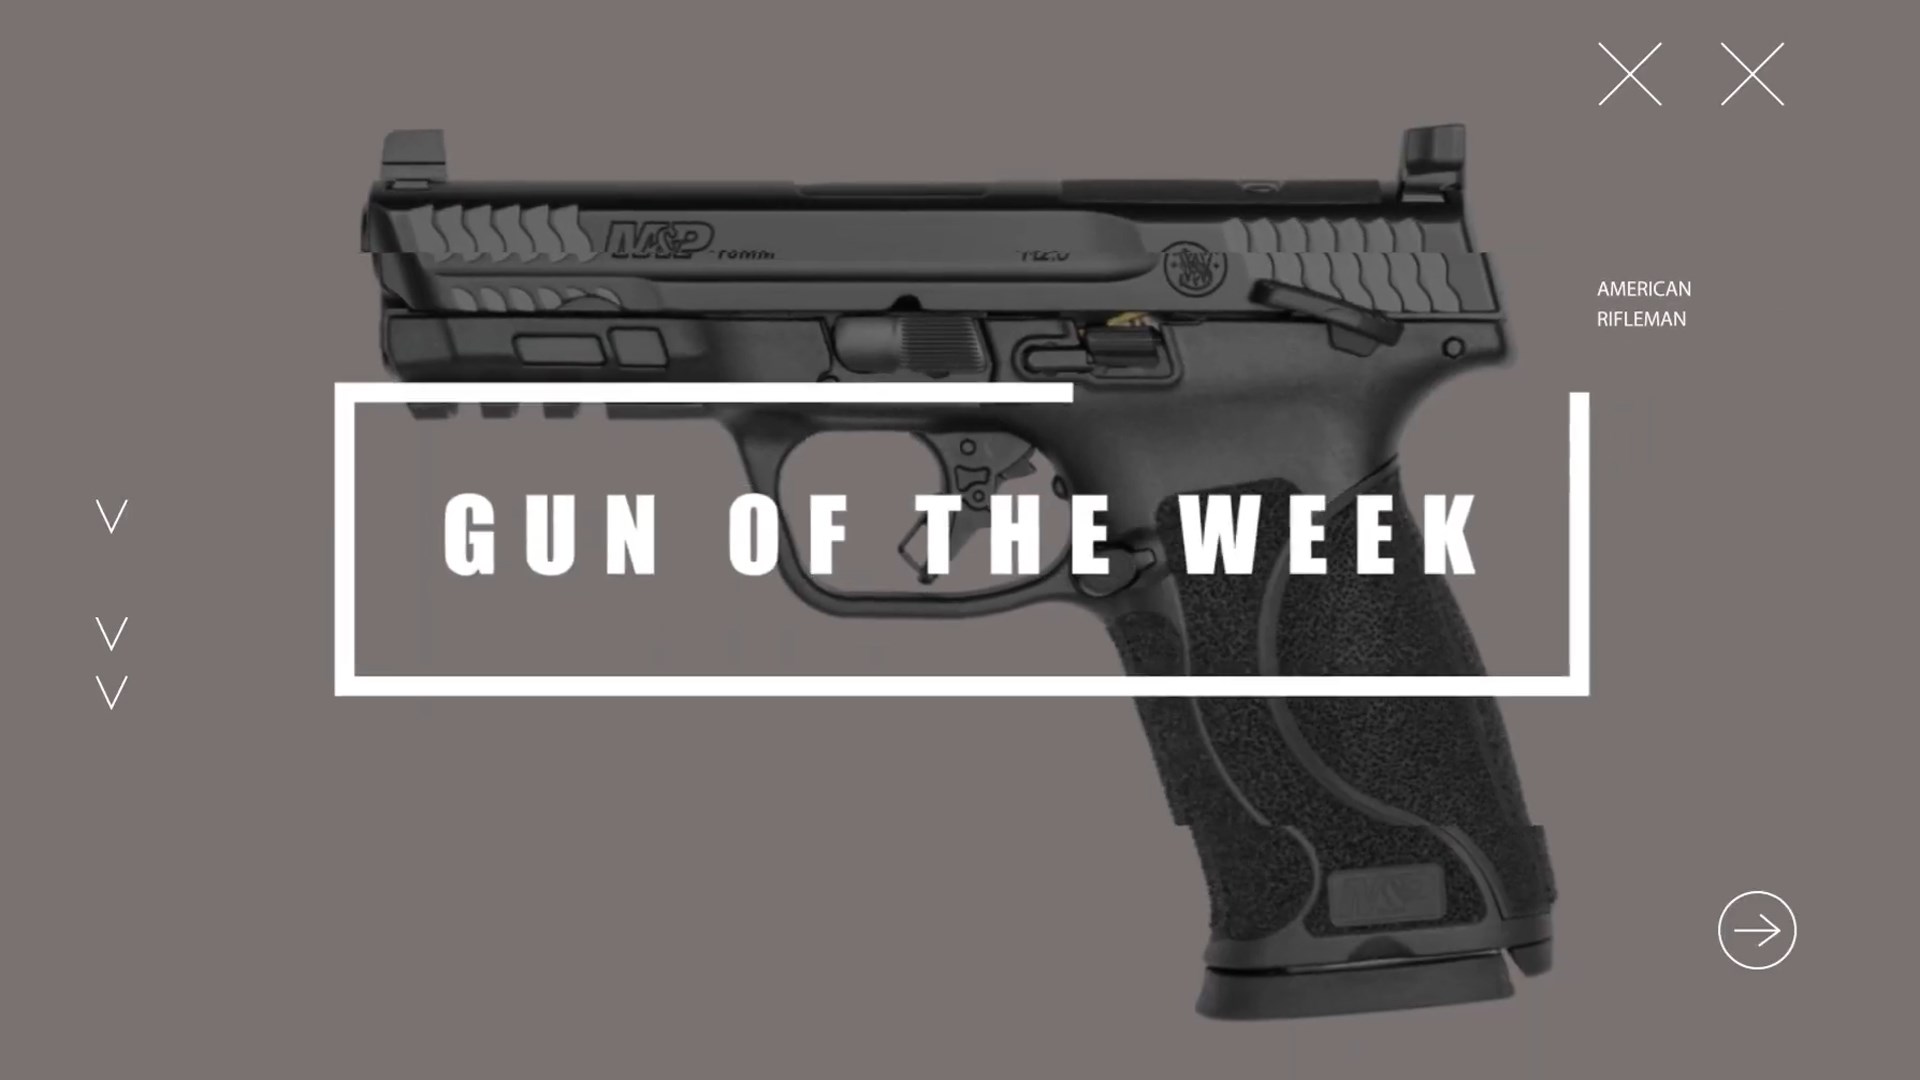 Gun Of The Week title screen text on image gun black left-side view smith & wesson m&p 2.0 10 mm auto gun